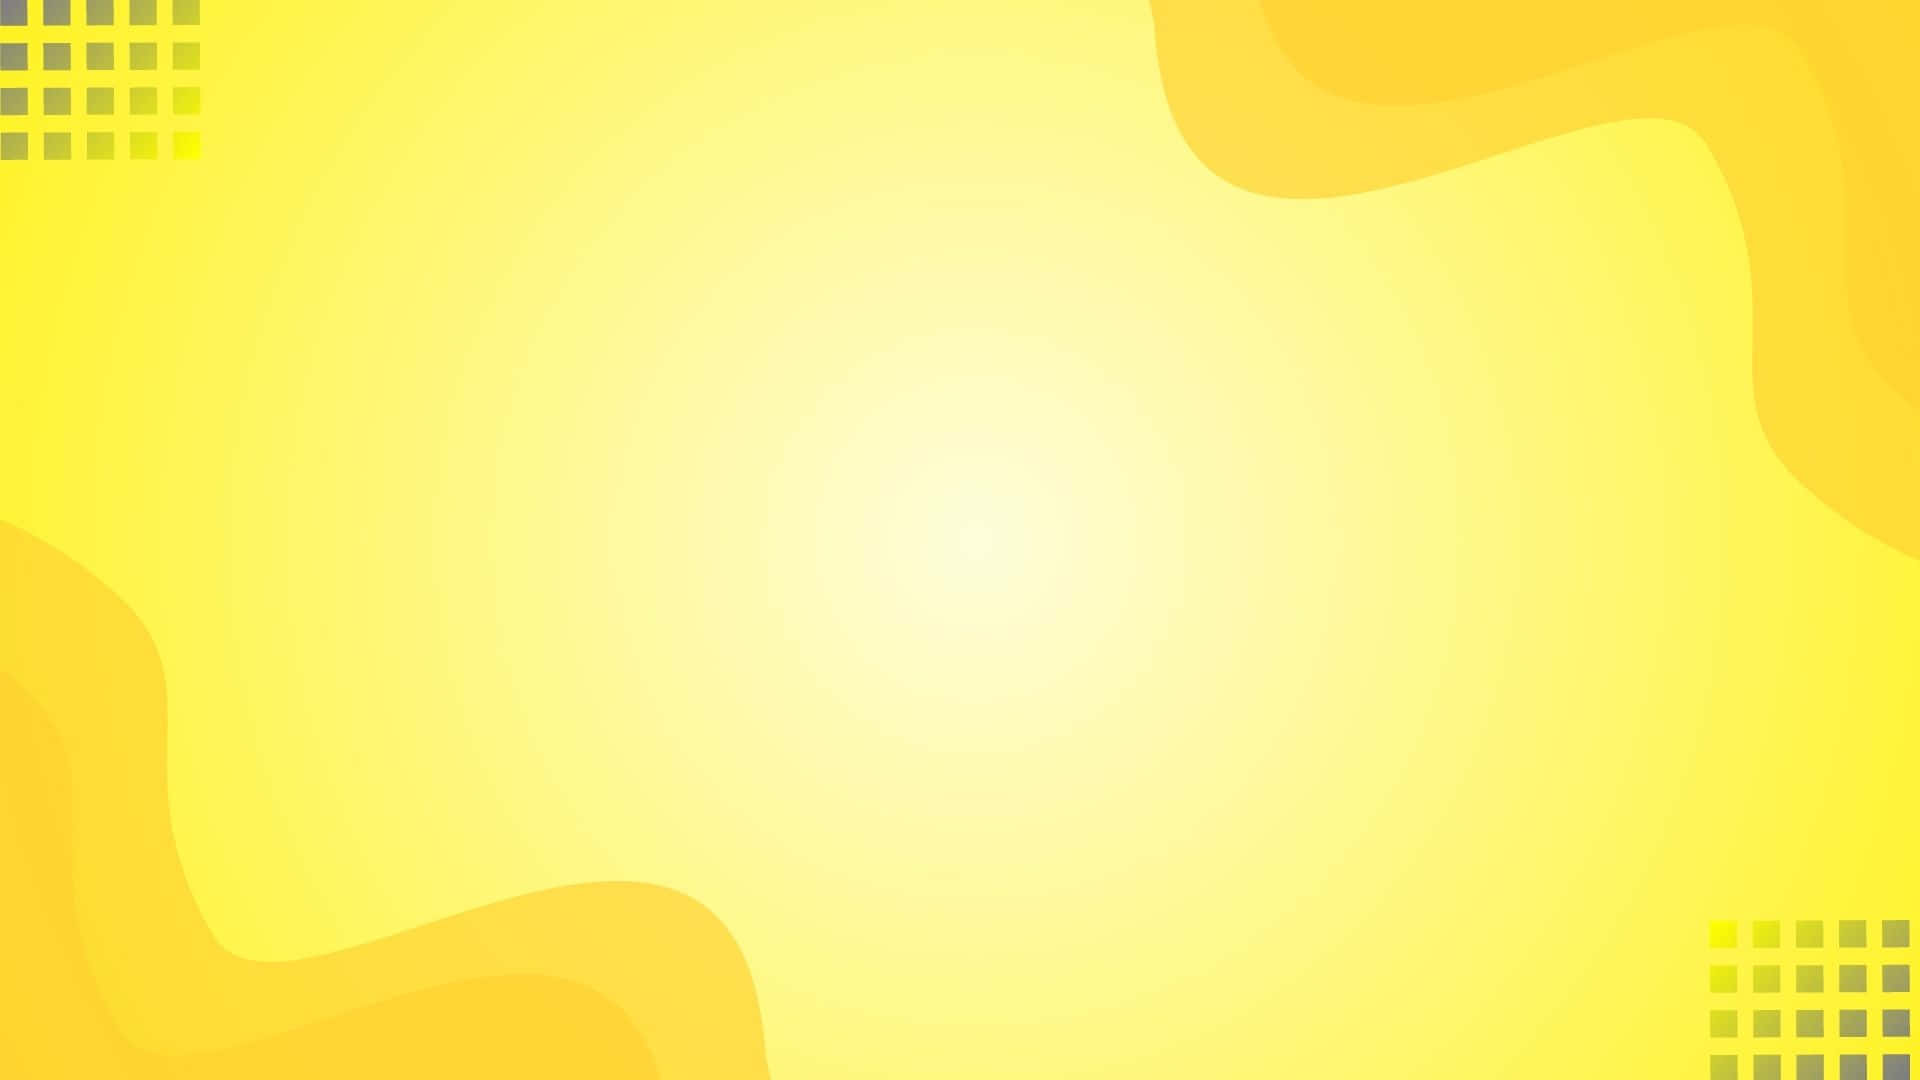 Add some sunshine to your day with this gorgeous yellow aesthetic background